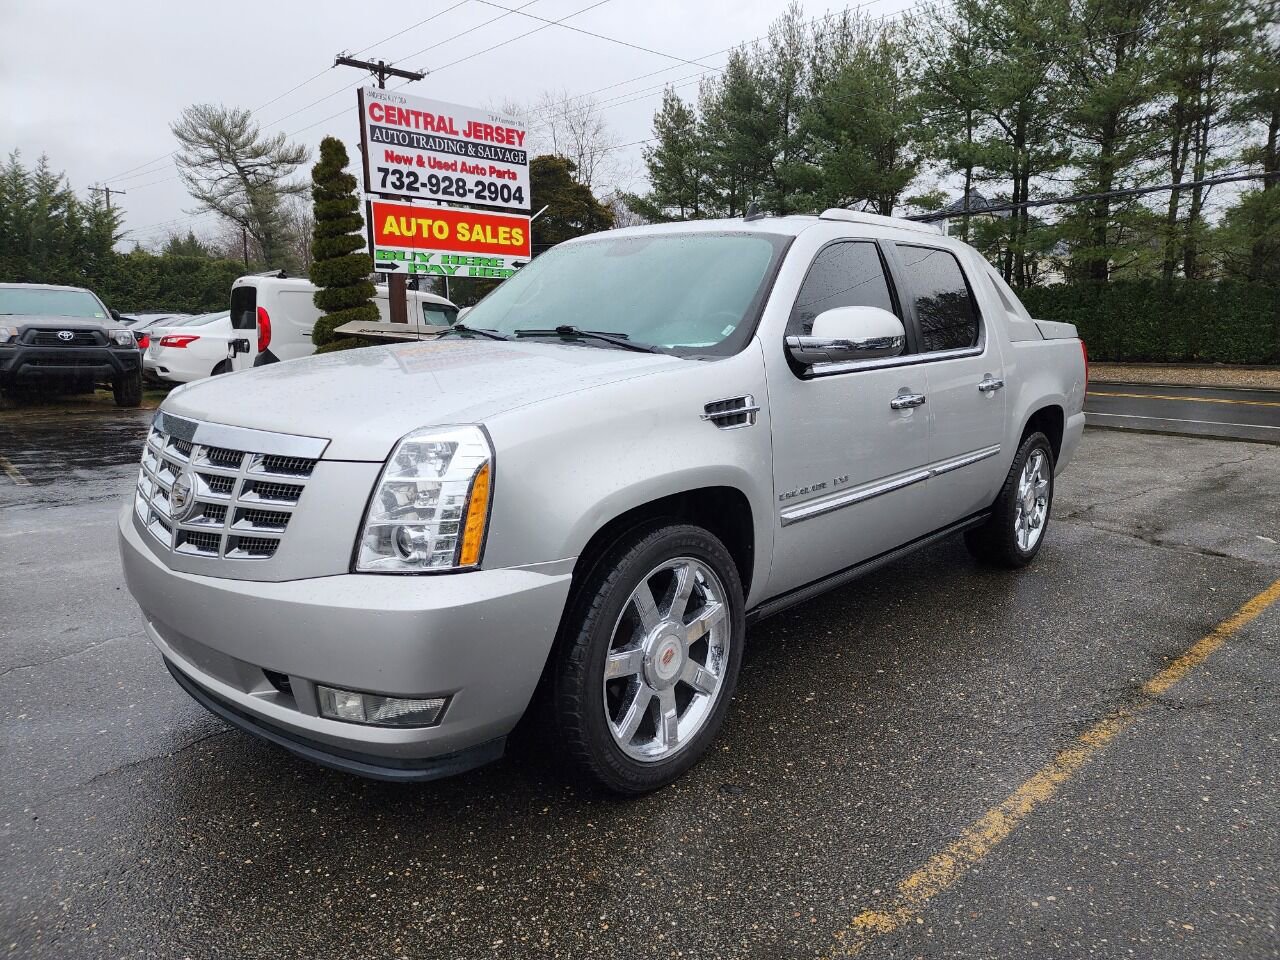 Used 2011 Cadillac Escalade EXT for Sale in Philadelphia, PA (Test Drive at  Home) - Kelley Blue Book